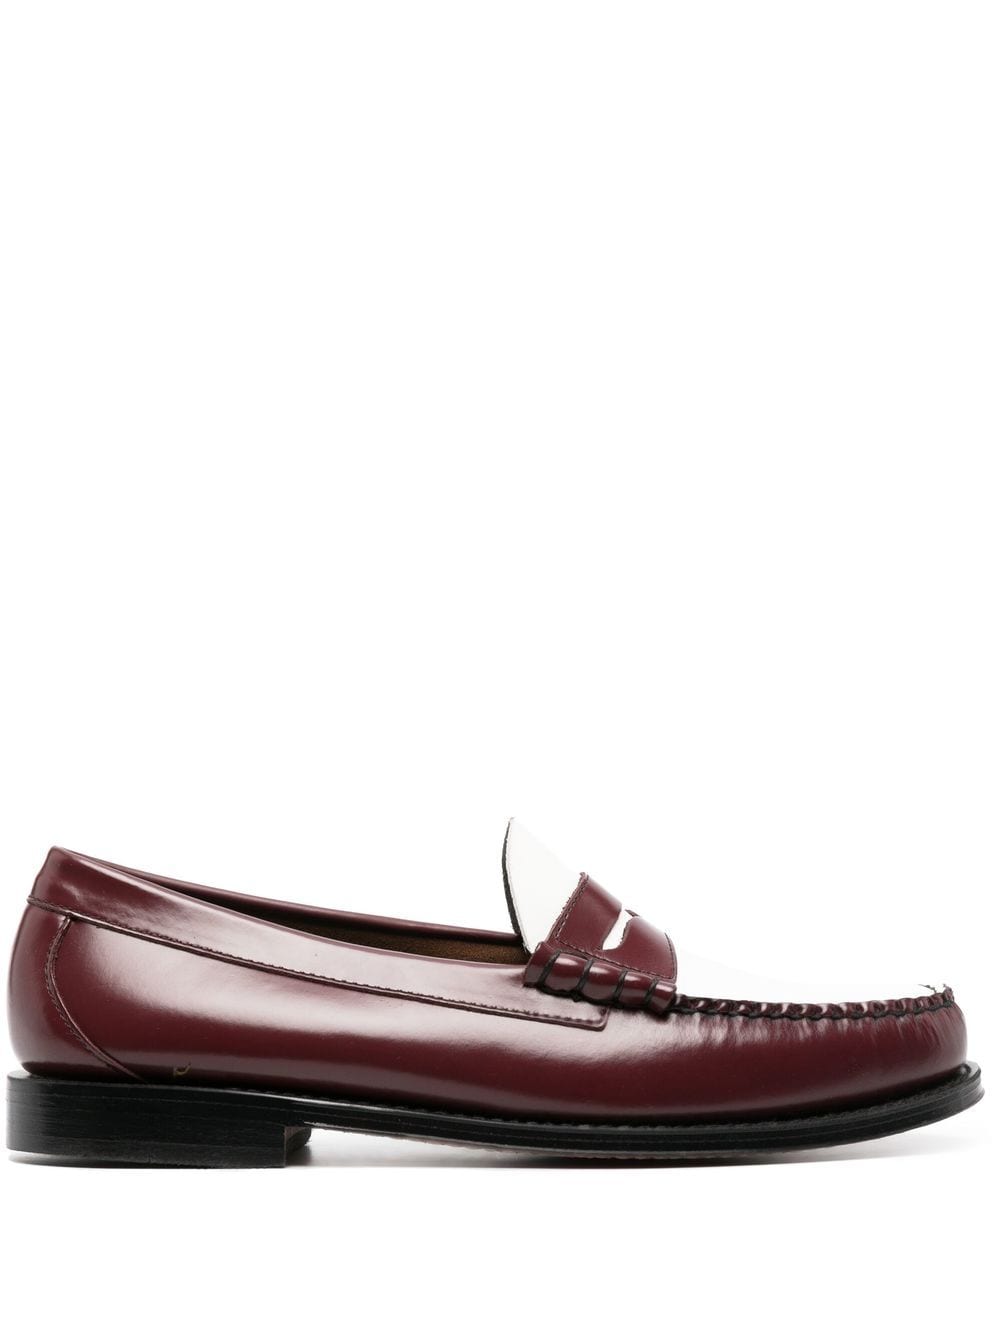 G.H. BASS & CO. HERITAGE LEATHER LOAFERS